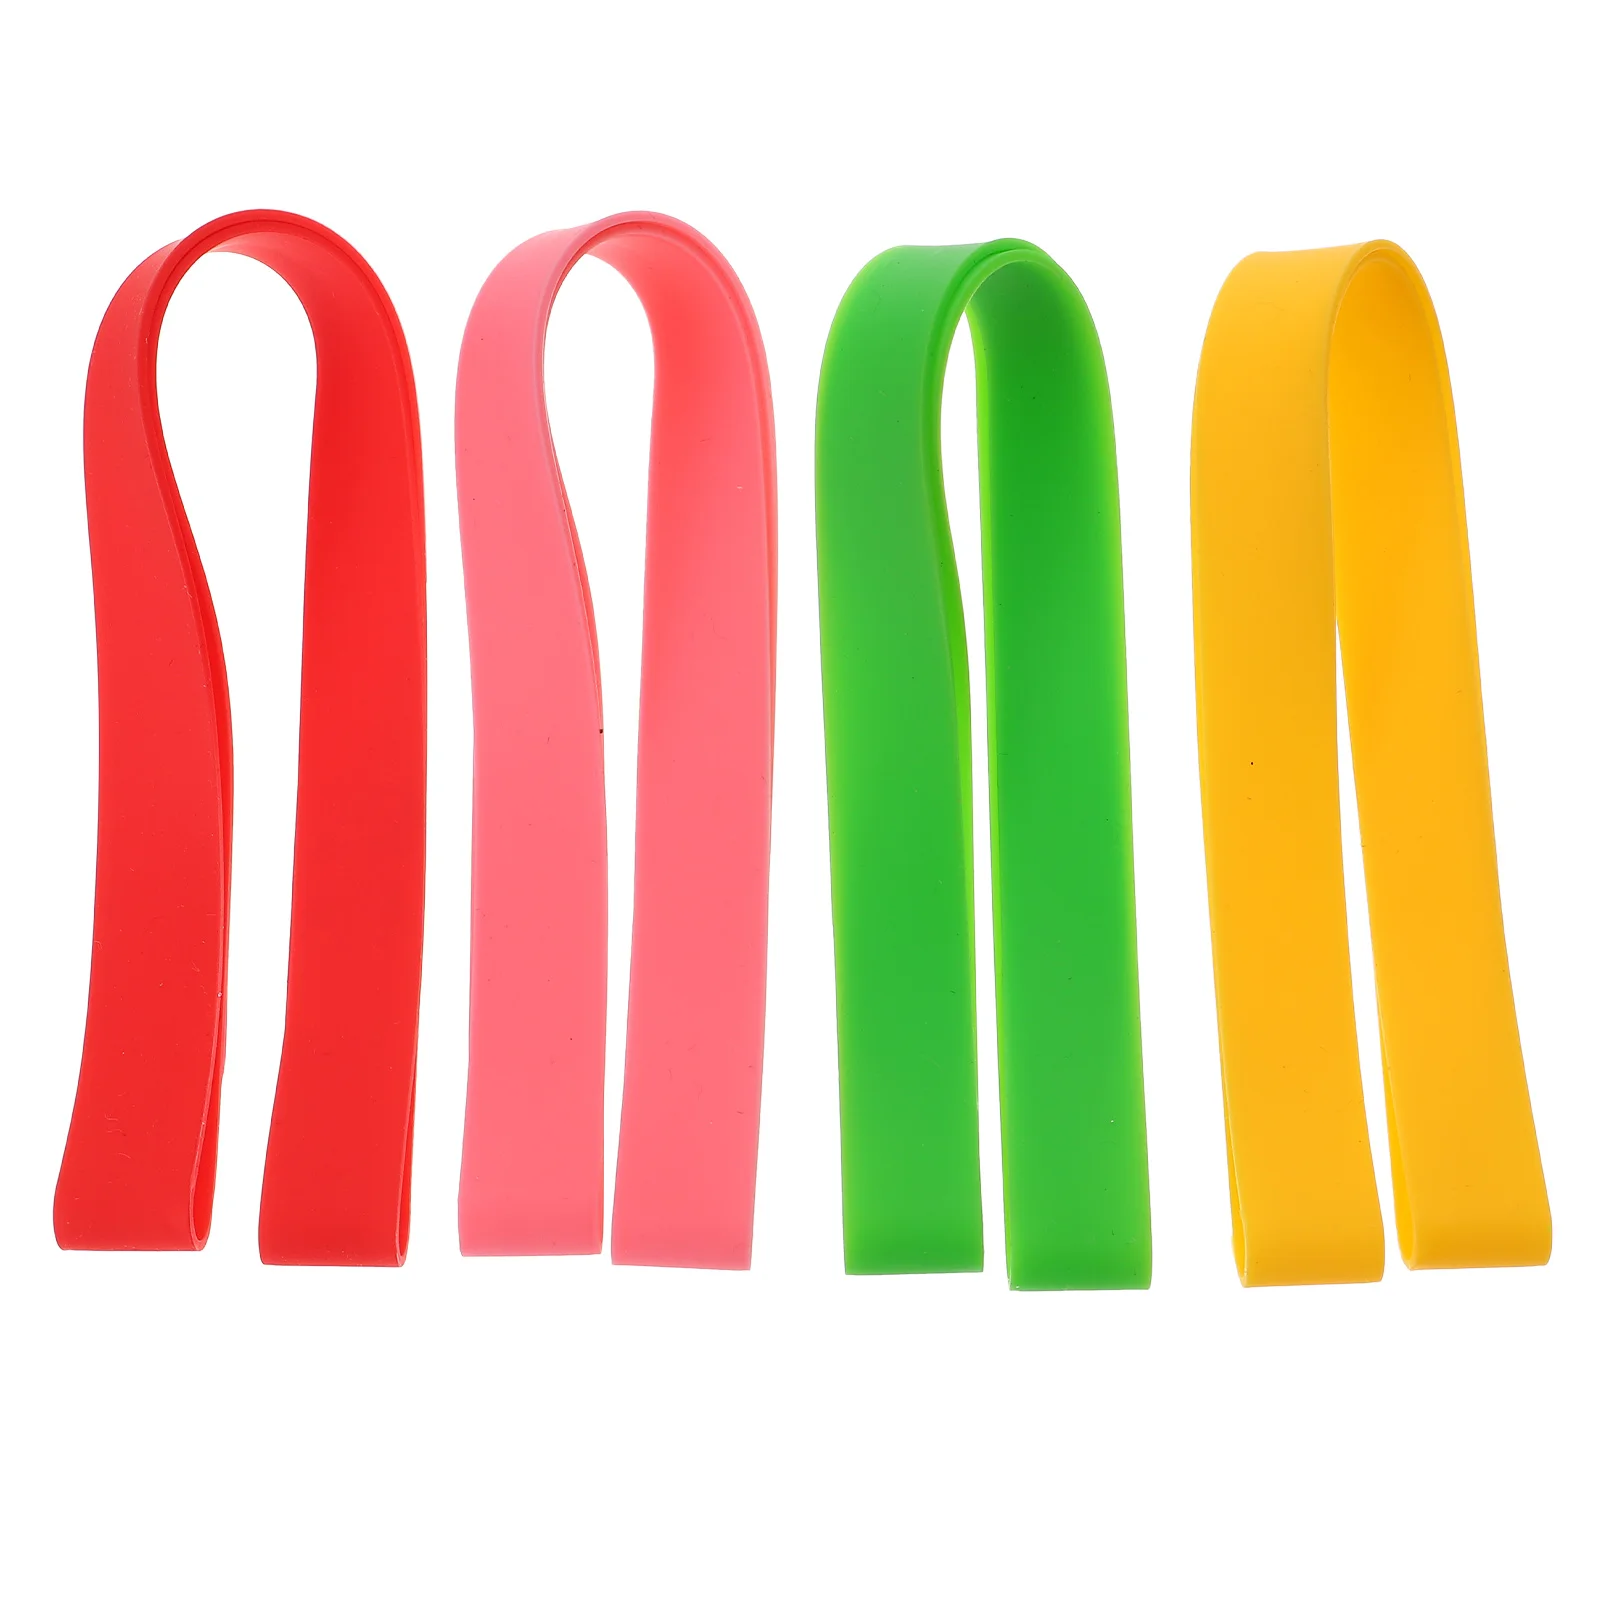 

Towel Beach Chair Bands Band Clipsholder Silicone Elastic Strap Chairs Rubberanti Pool Accessories Clamps Seaside Resistance